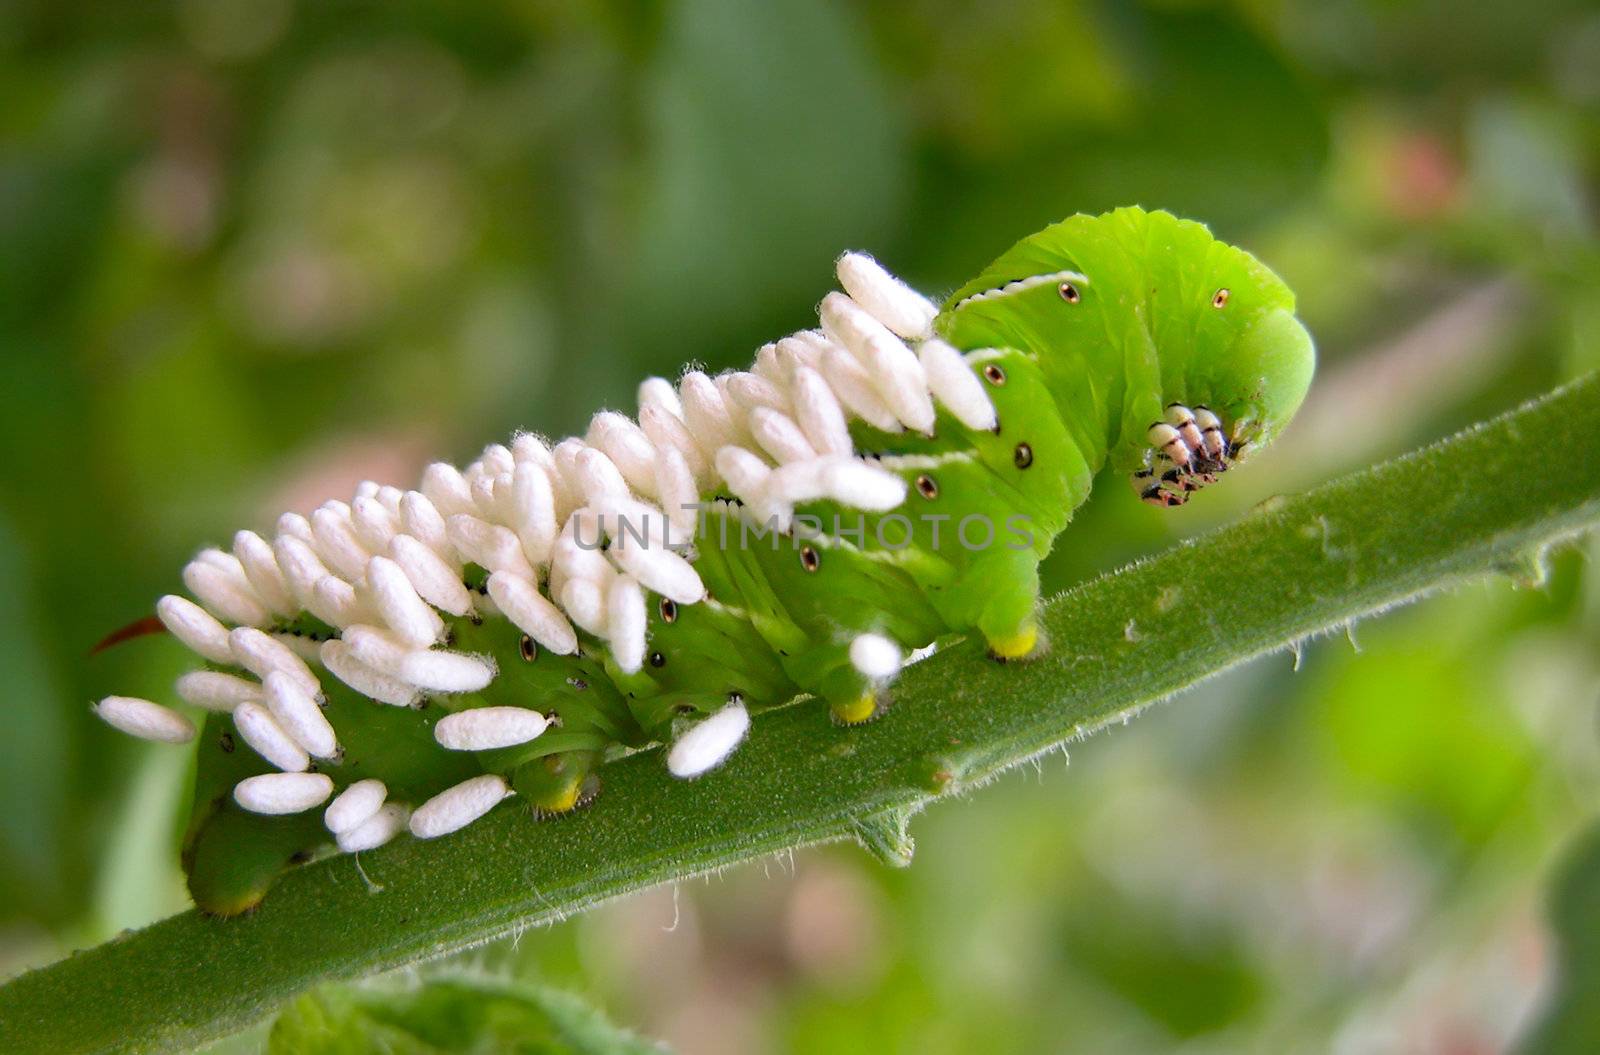 Tomato Hornworm with Wasp Eggs by sbonk